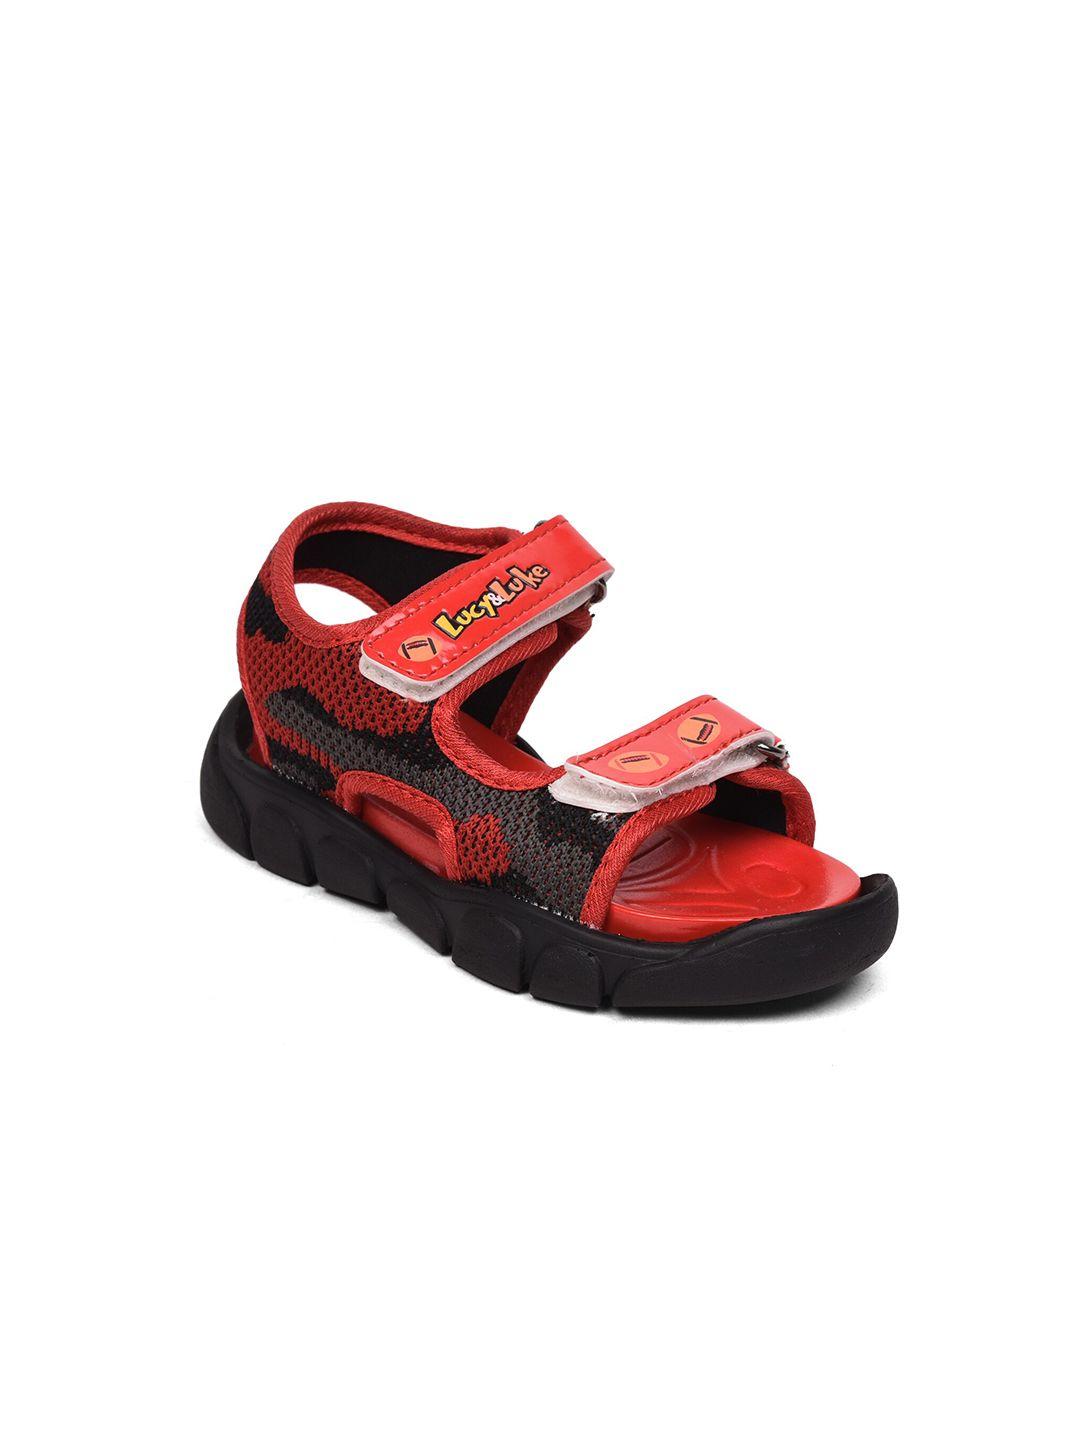 liberty unisex-kids red printed sports sandals